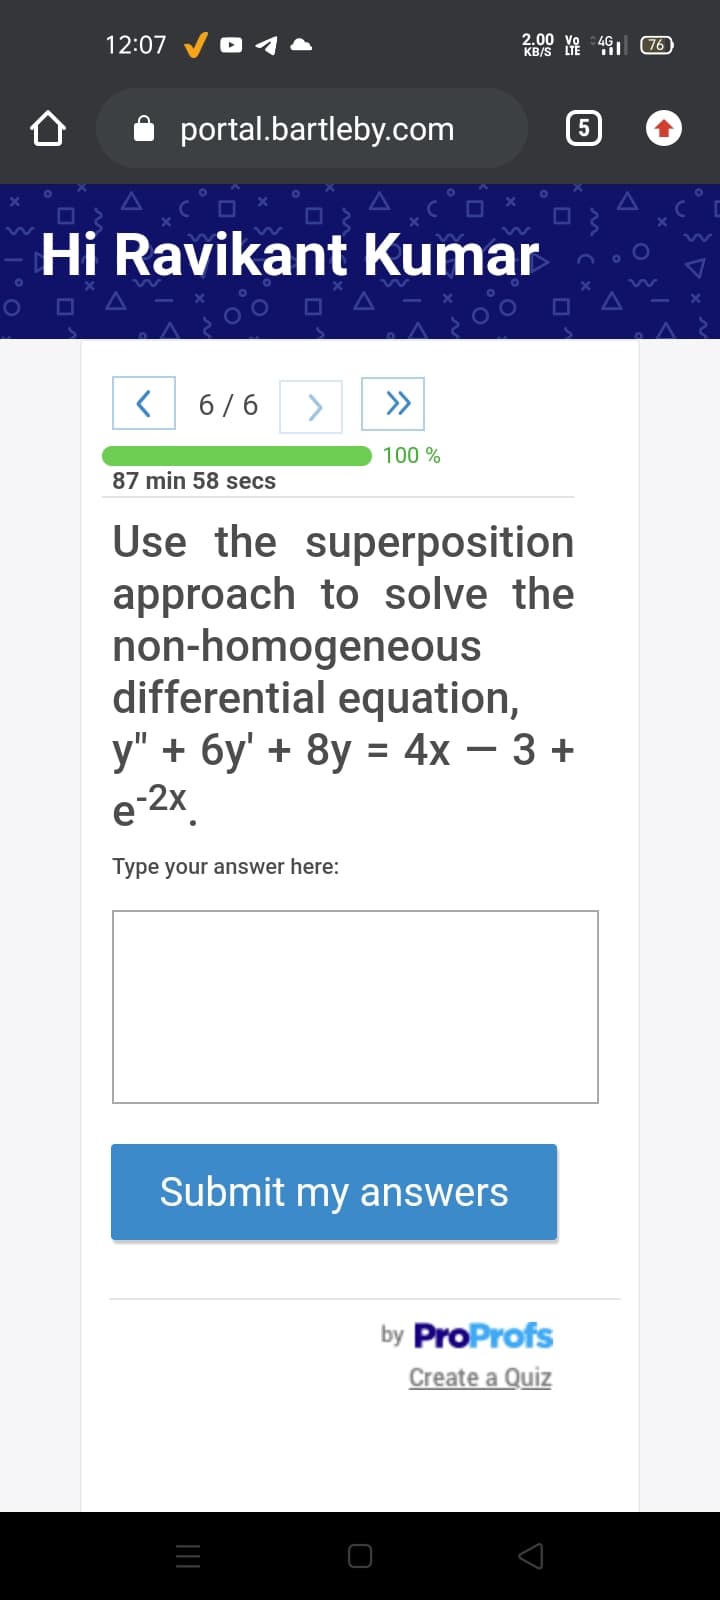 12:07
2.00 vo 4G 76
KB/S
portal.bartleby.com
Hi Ravikant Kumar
6/6
<>
100 %
87 min 58 secs
Use the superposition
approach to solve the
non-homogeneous
differential equation,
у" + бу' + 8у %3D 4x — 3 +
e-2X.
Type your answer here:
Submit my answers
by ProProfs
Create a Quiz
||
